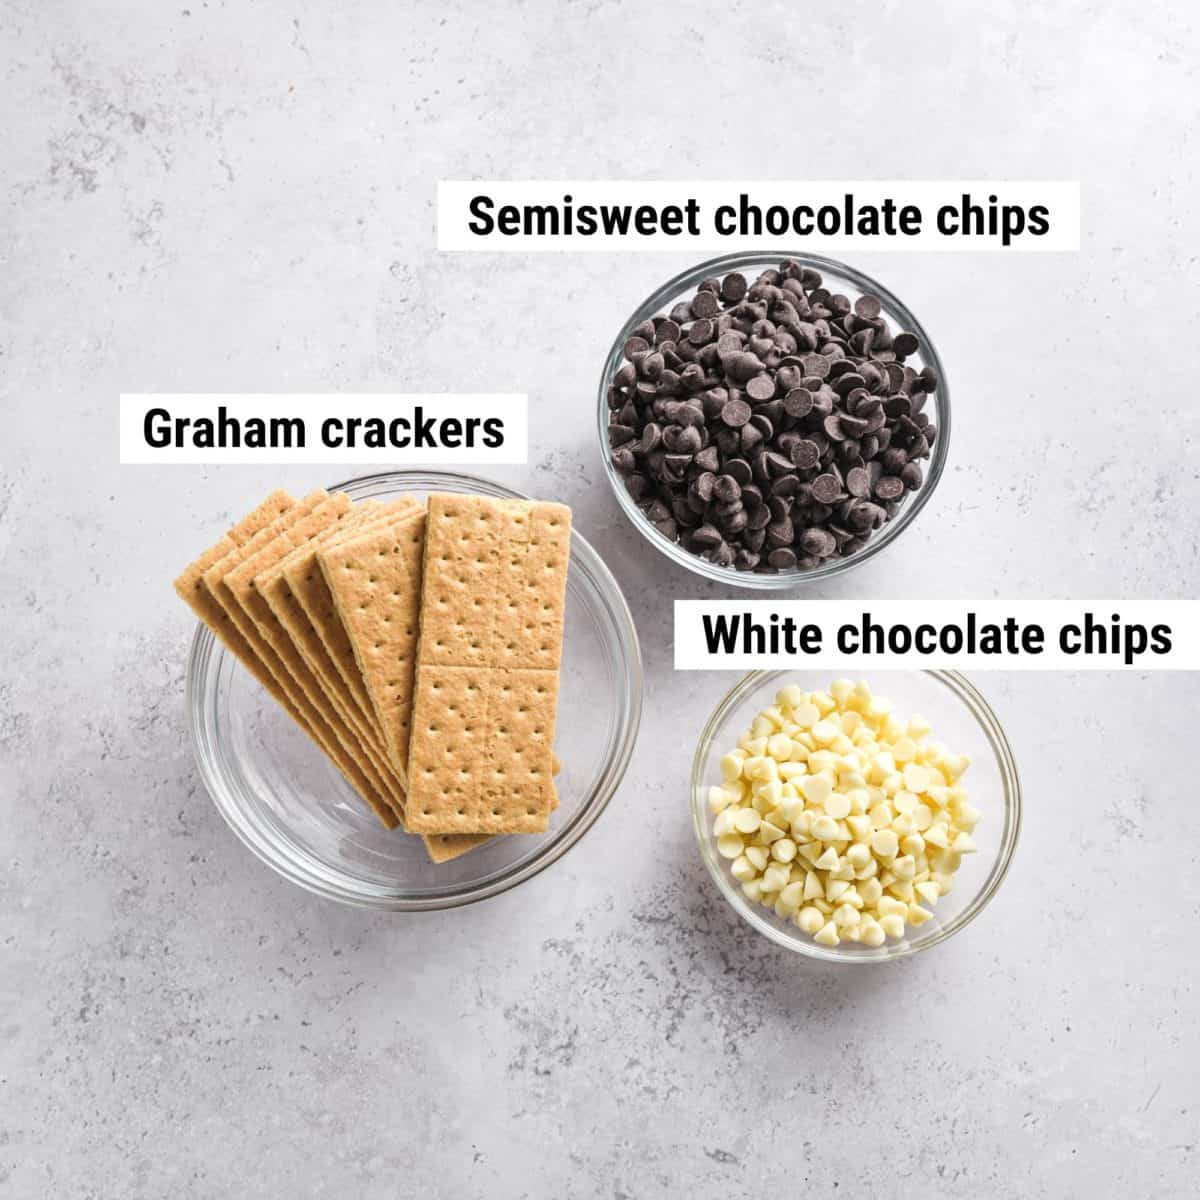 The ingredients to make chocolate covered graham crackers spread out on a table.